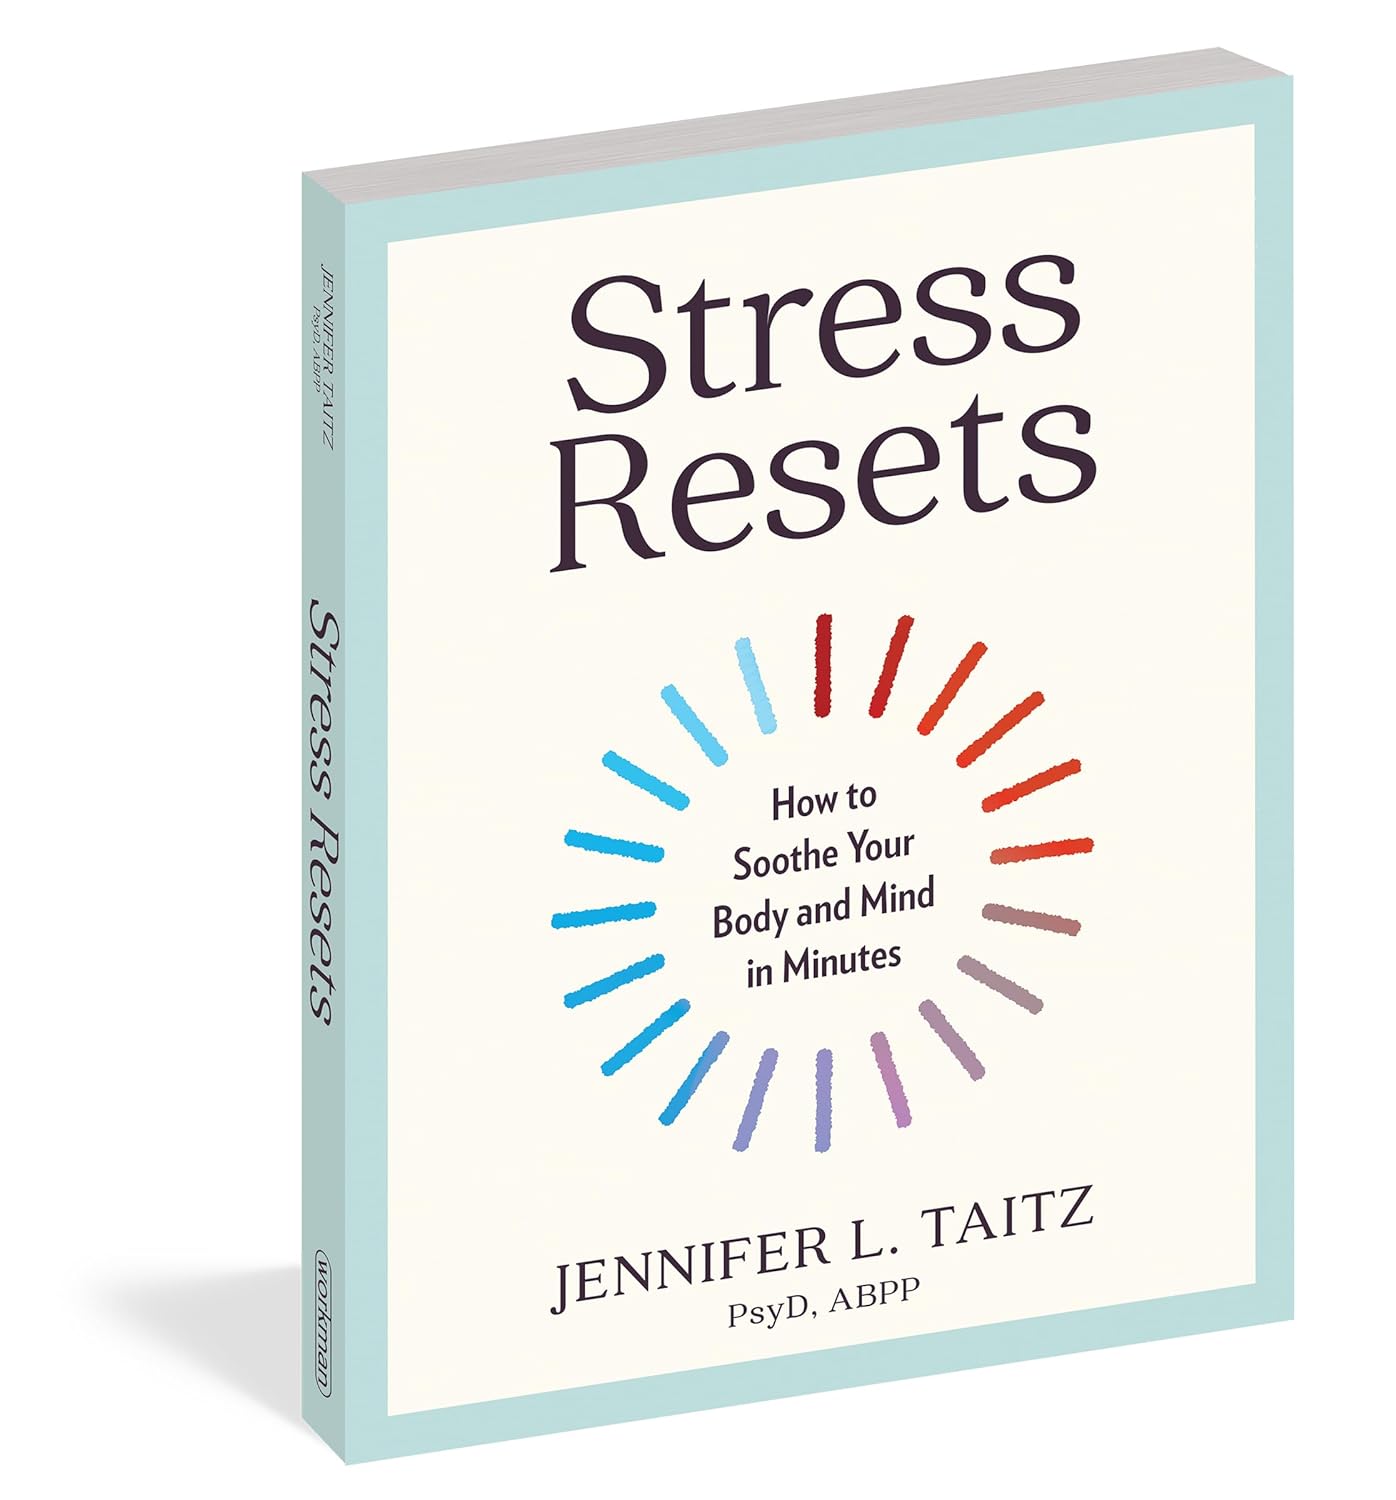 Stress Resets, a book by Dr. Jenny Taitz